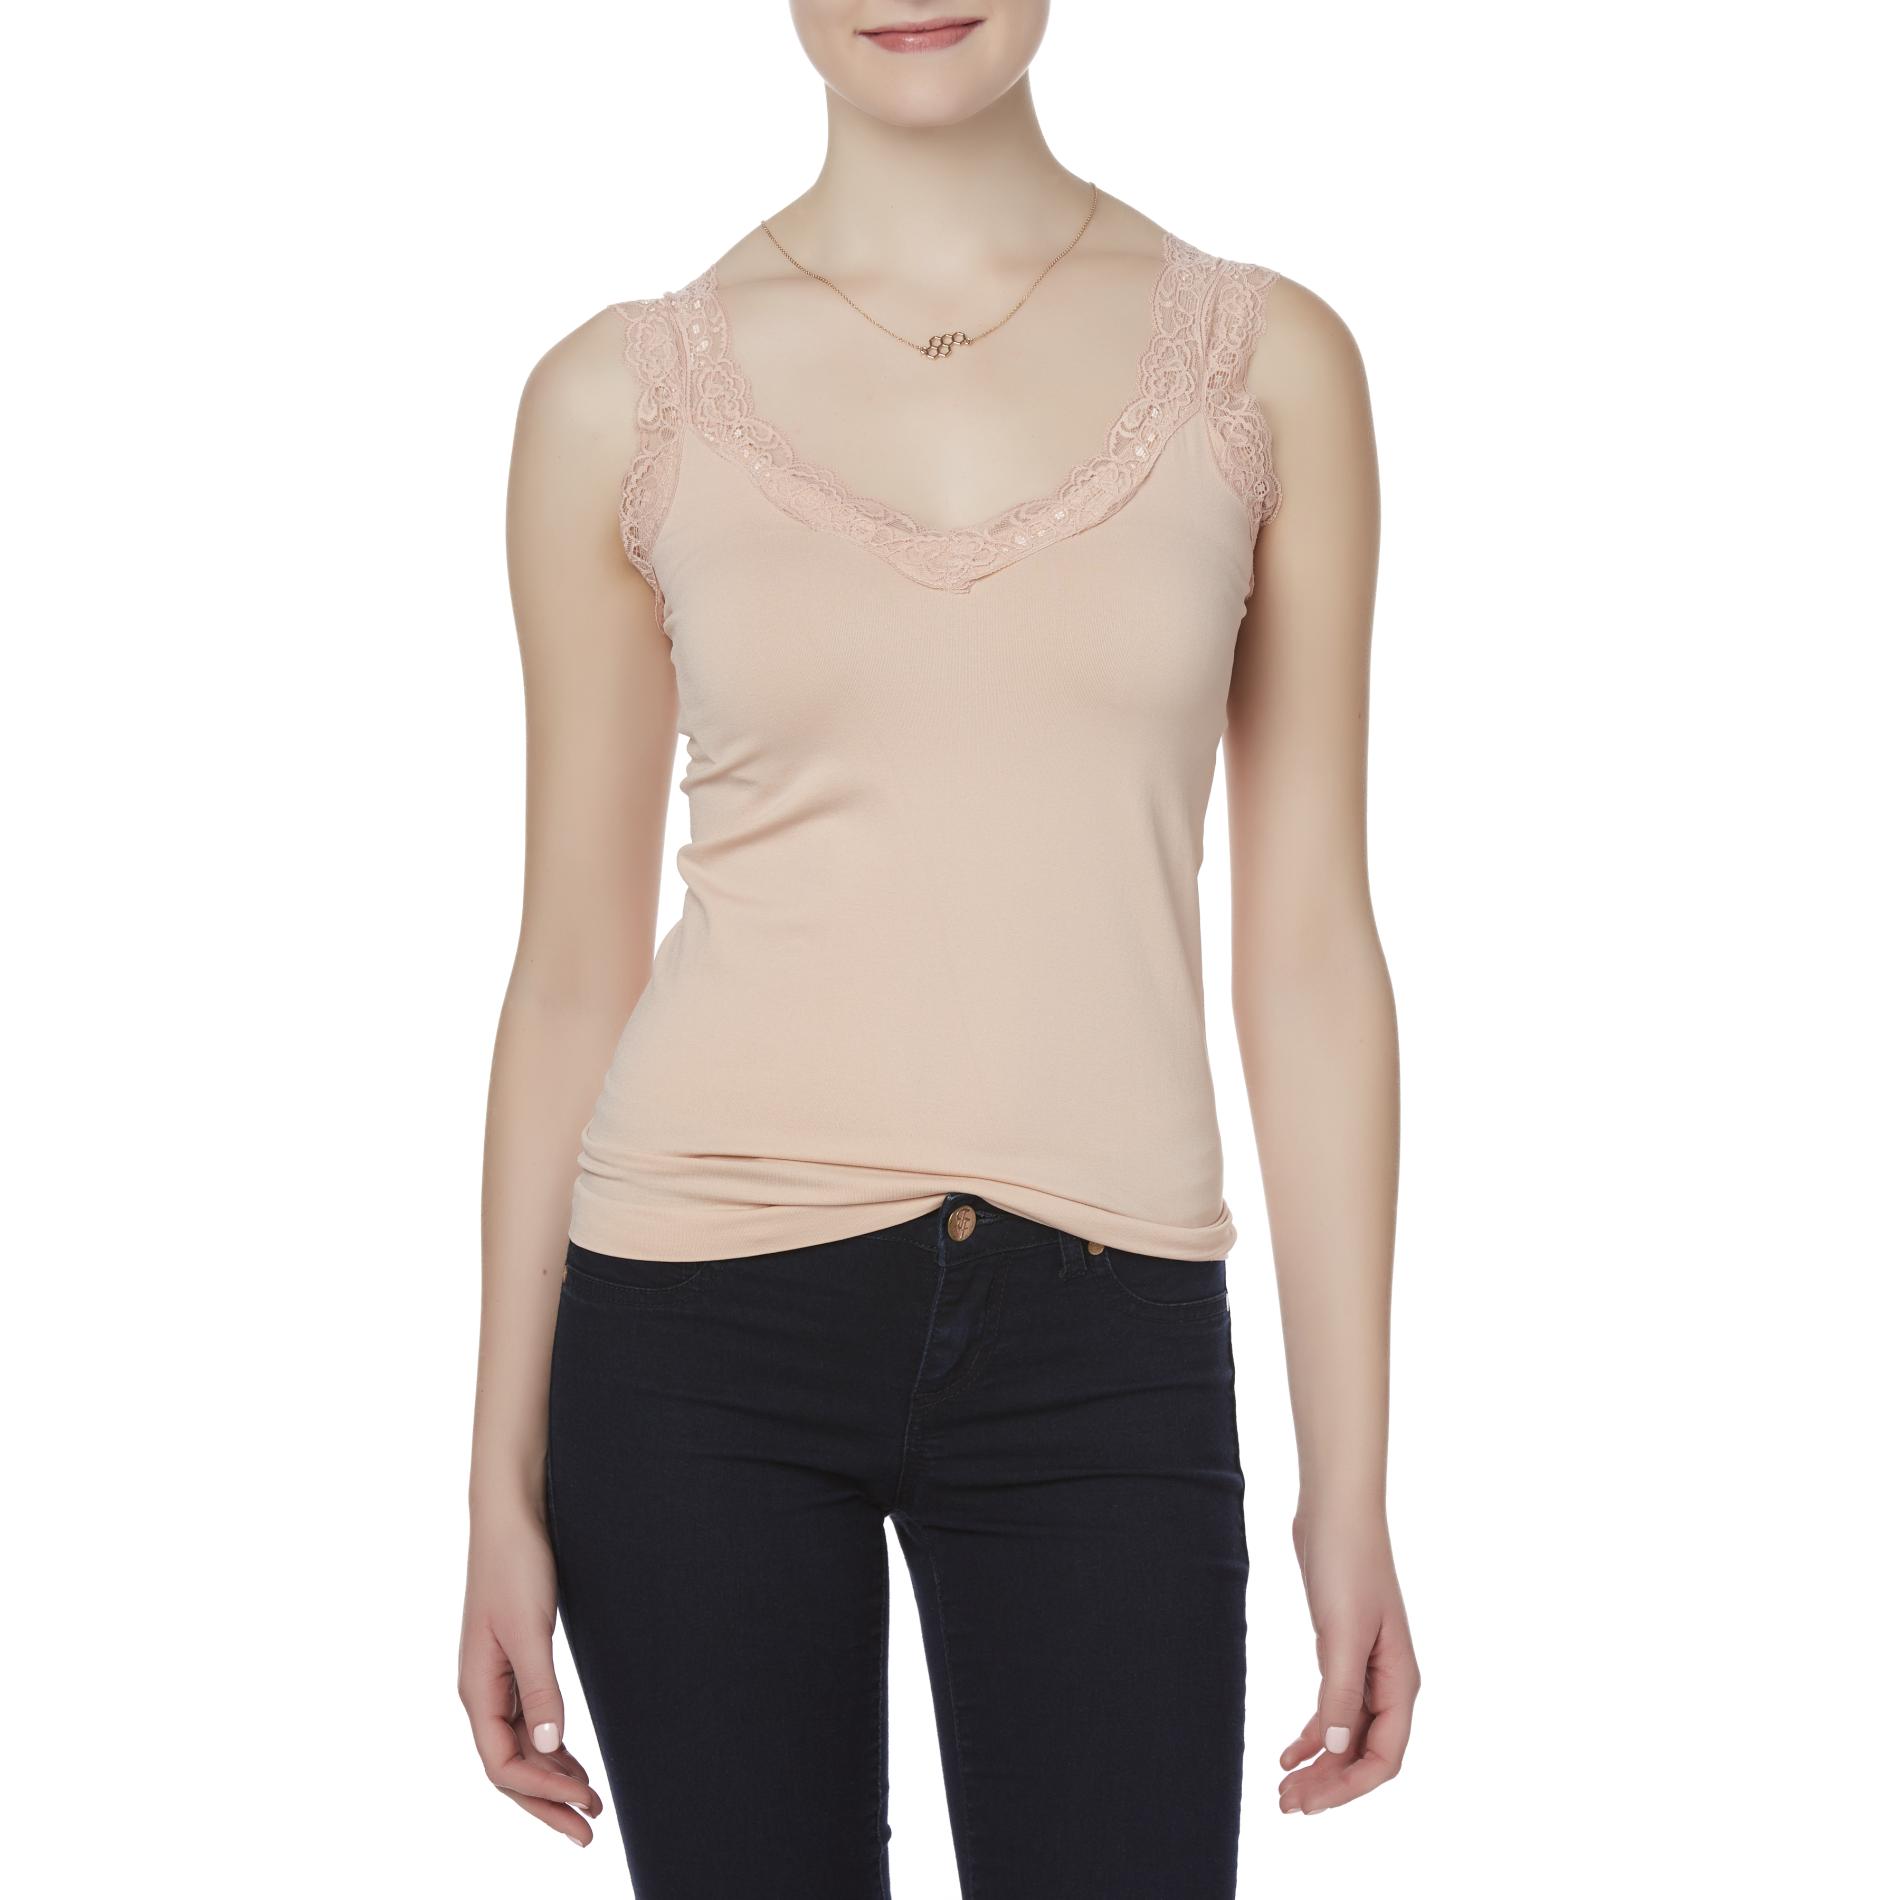 Simply Styled Women's Lace Camisole